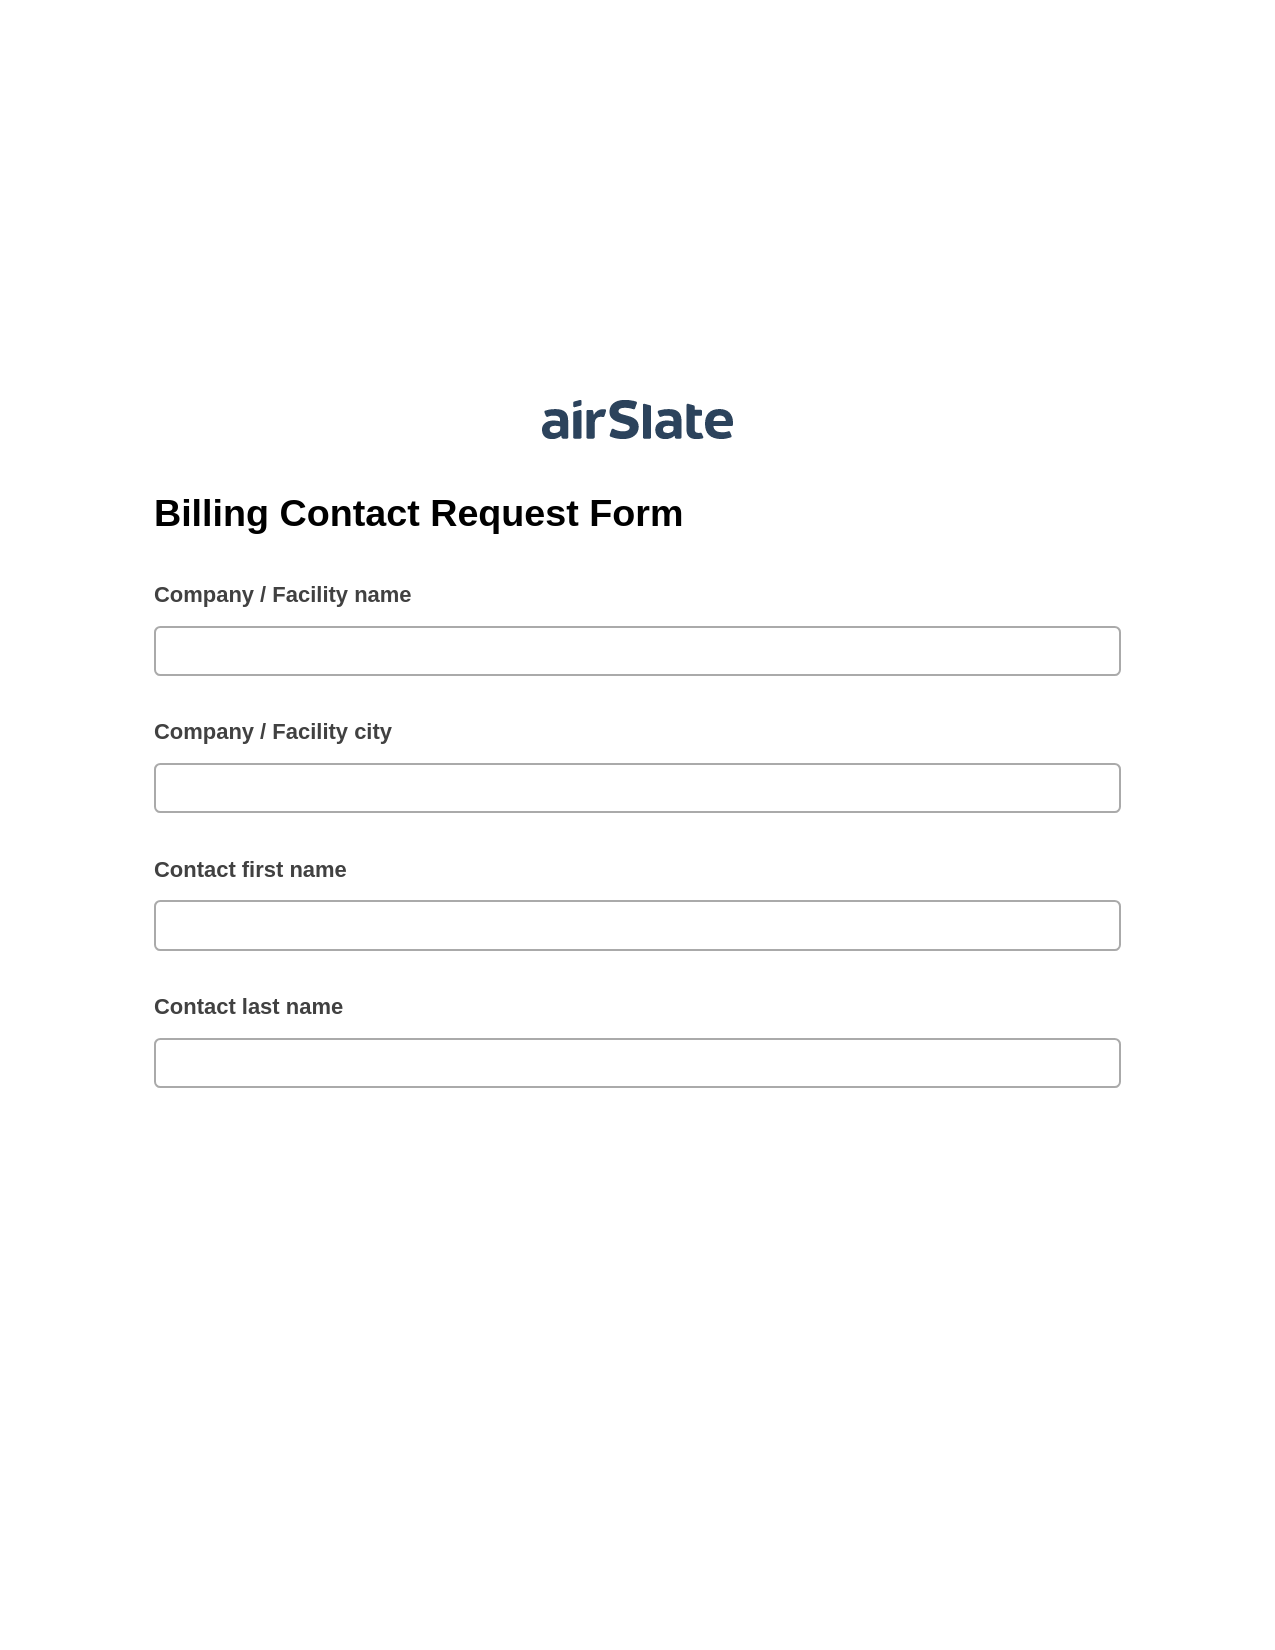 Multirole Billing Contact Request Form Pre-fill Dropdowns from MySQL Bot, Create slate addon, Email Notification Postfinish Bot